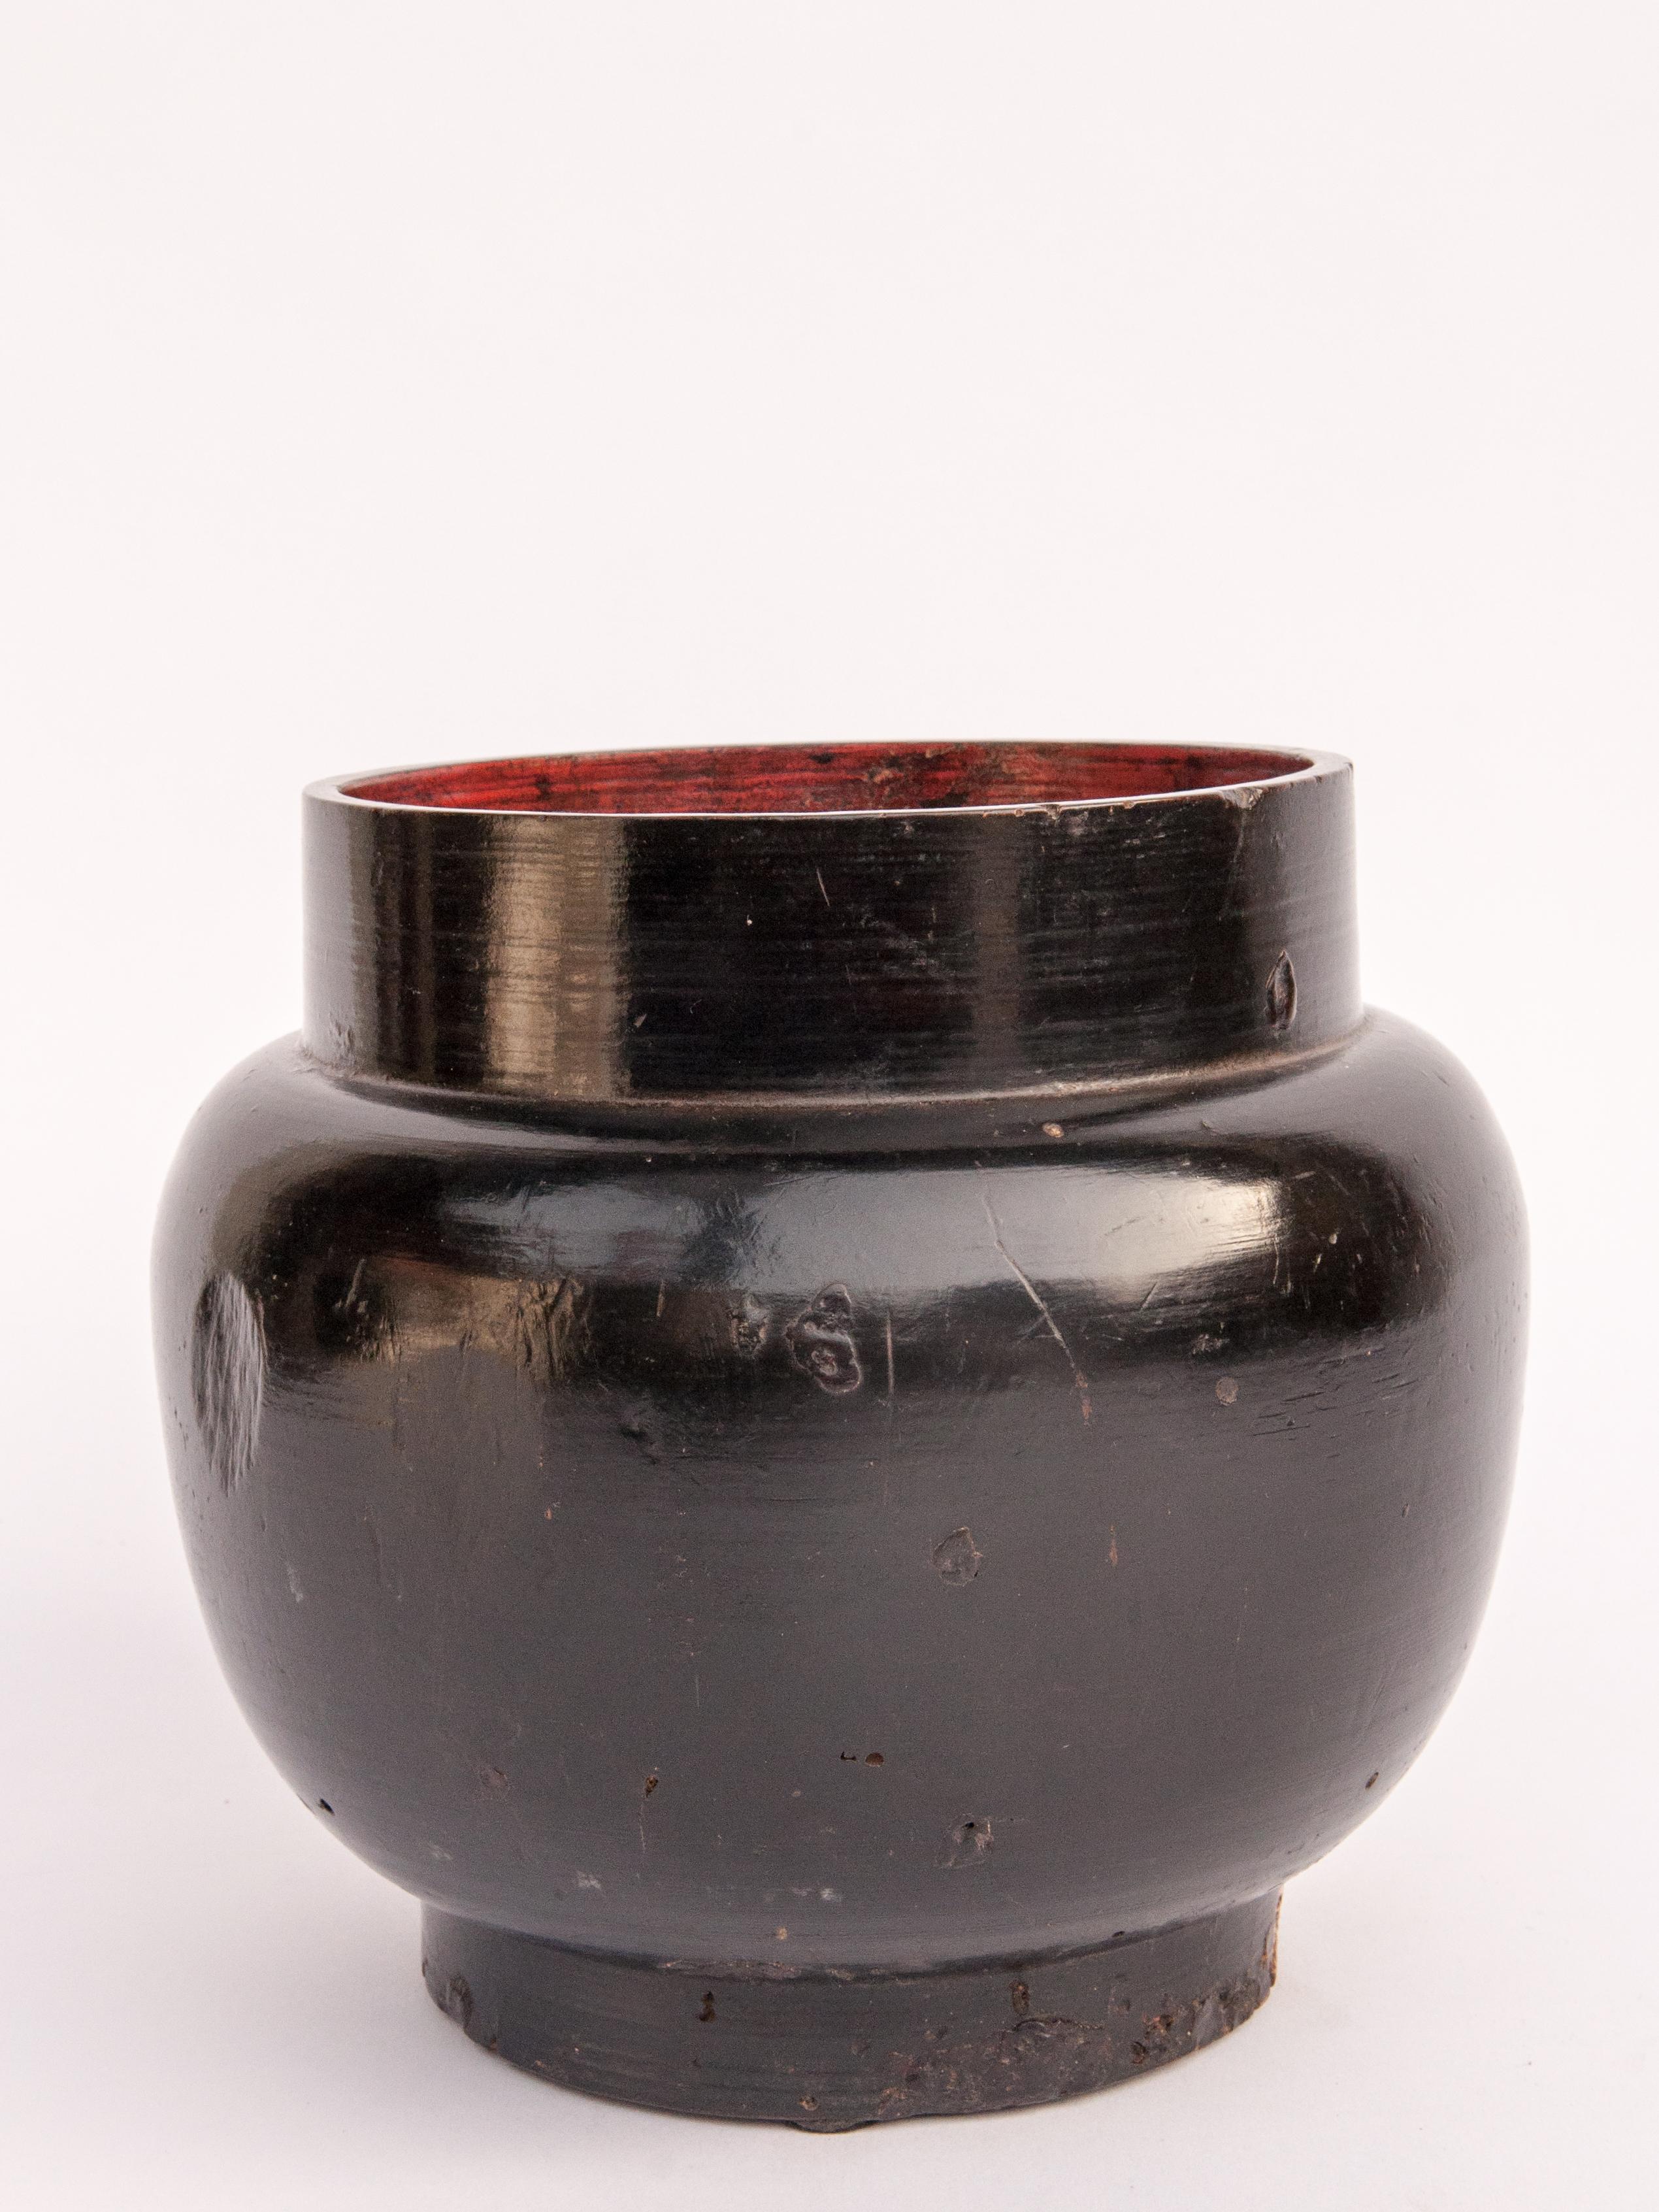 Vintage wooden beer pot from Bhutan, mid-20th century.
This pot was used as container for Tongpa, the ubiquitous fermented barley drink of the Tibetans. It is fashioned by hand from a single piece of wood, with a lacquered finish.
Condition: It is